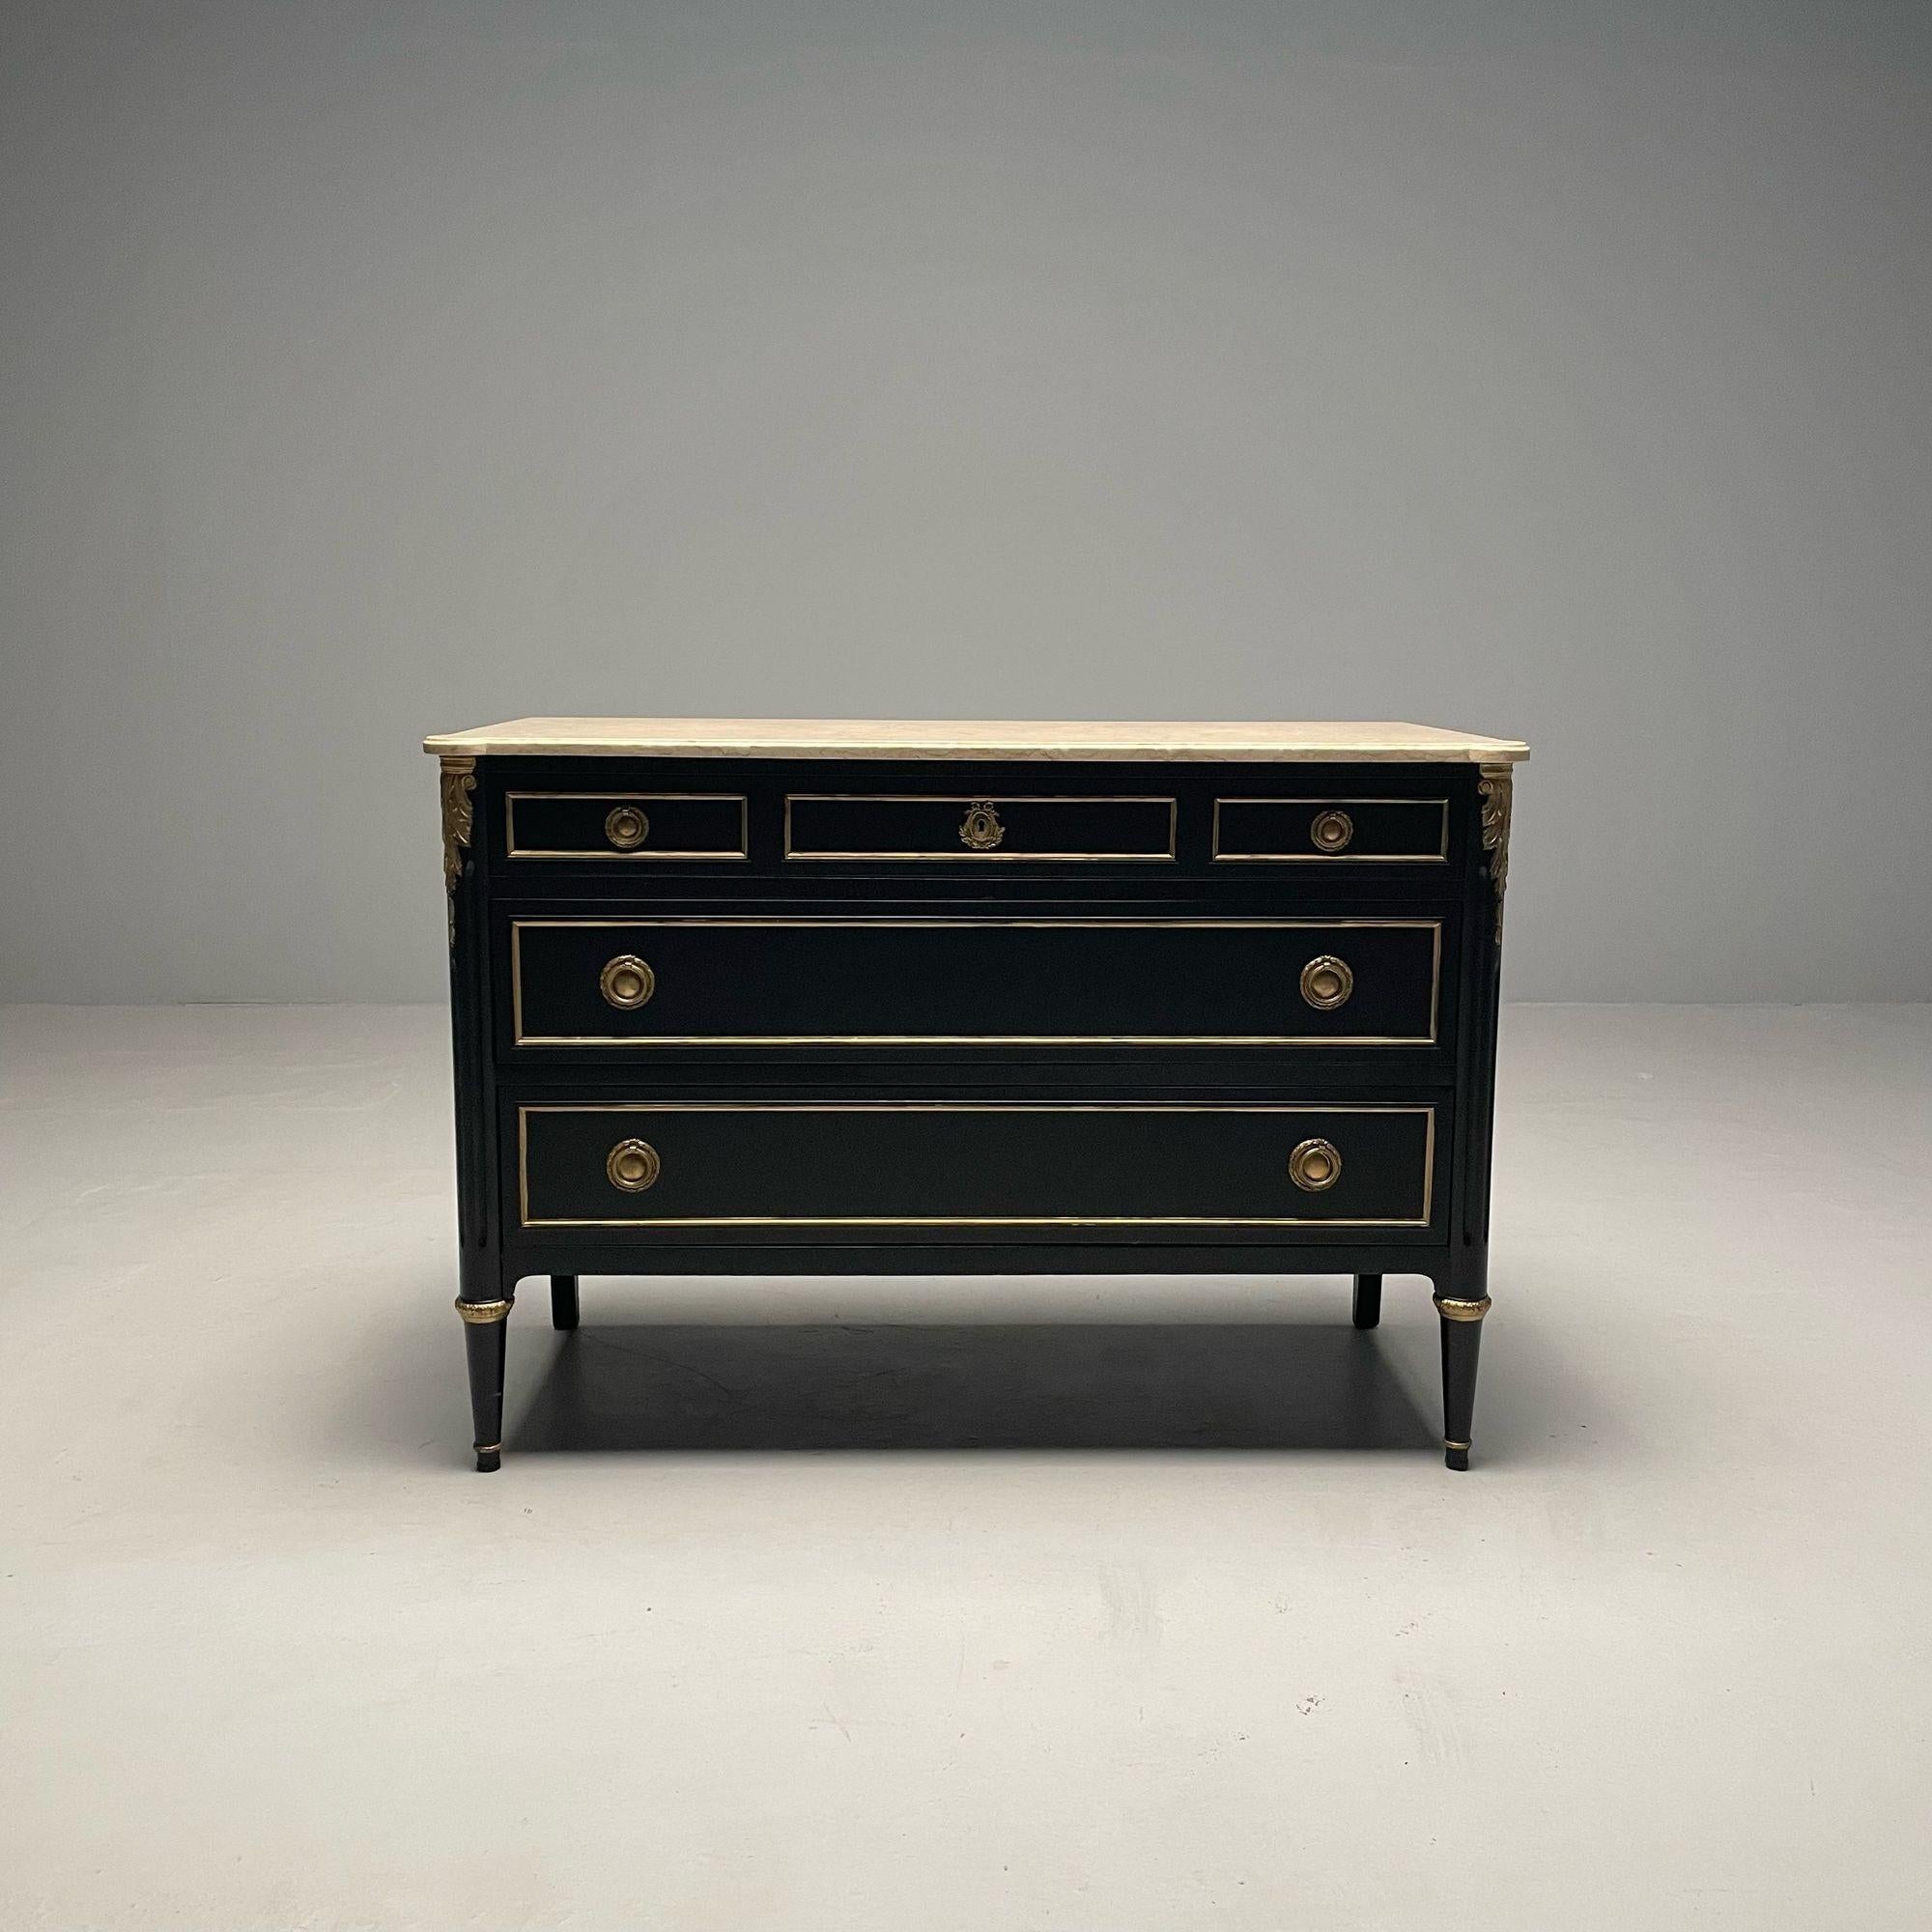 Hollywood Regency Maison Jansen Stamped Ebony Chest / Commode, Marble Top

An ebonized marble-top commode by Maison Jansen. Tapering bronze caped feet supporting a group of three drawers. The secondary woods of solid oak. The exterior of a fine